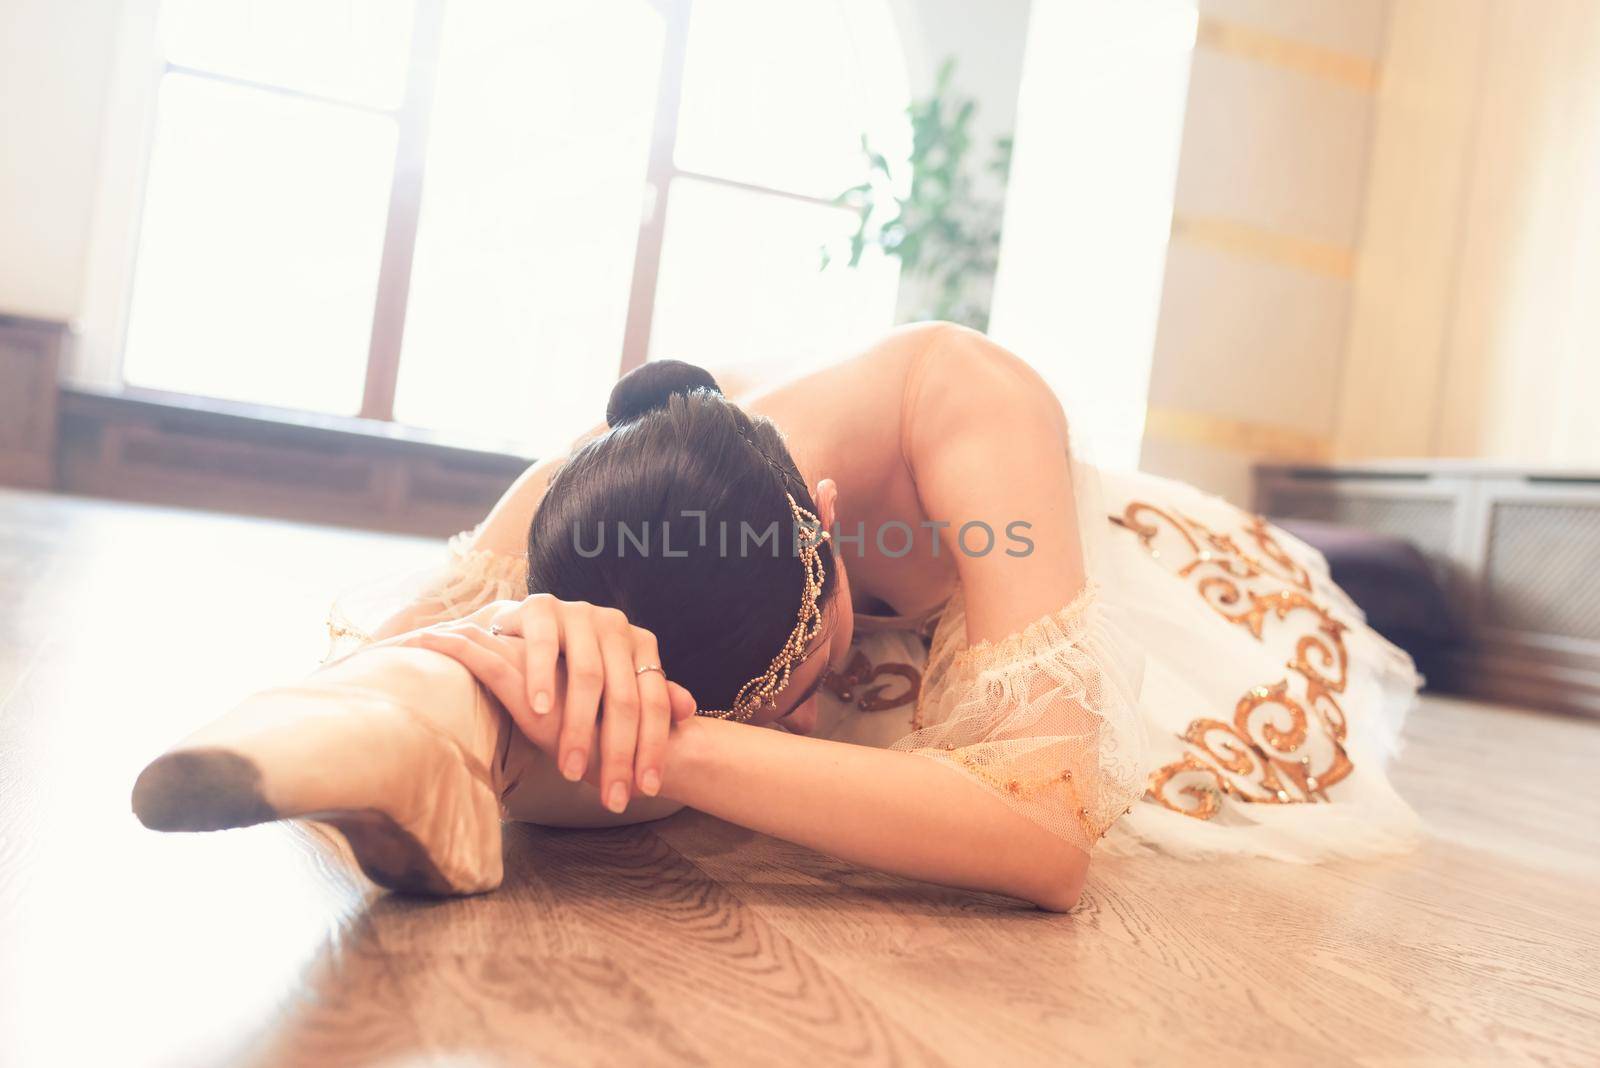 A ballerina in a white tutu warming up before training lying on the studio floor